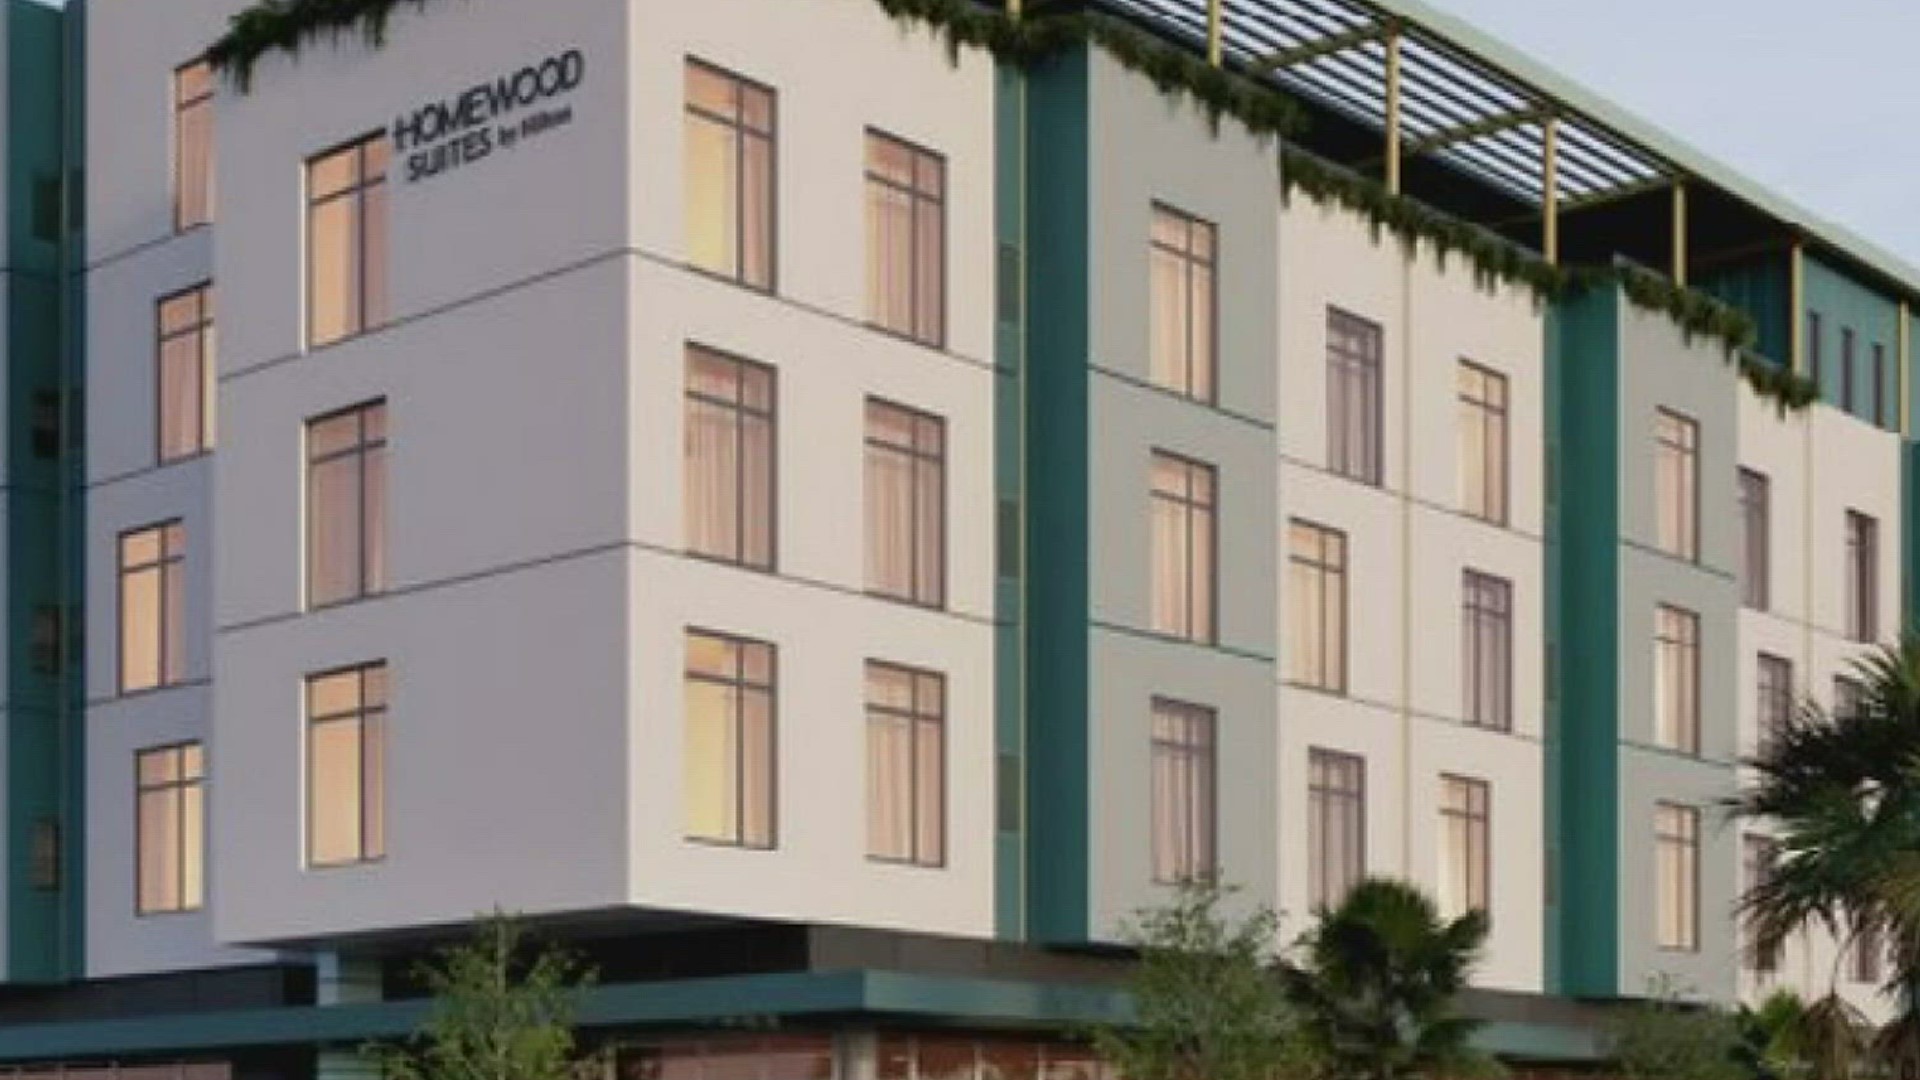 The Homewood Suites project is expected to be complete by next summer.